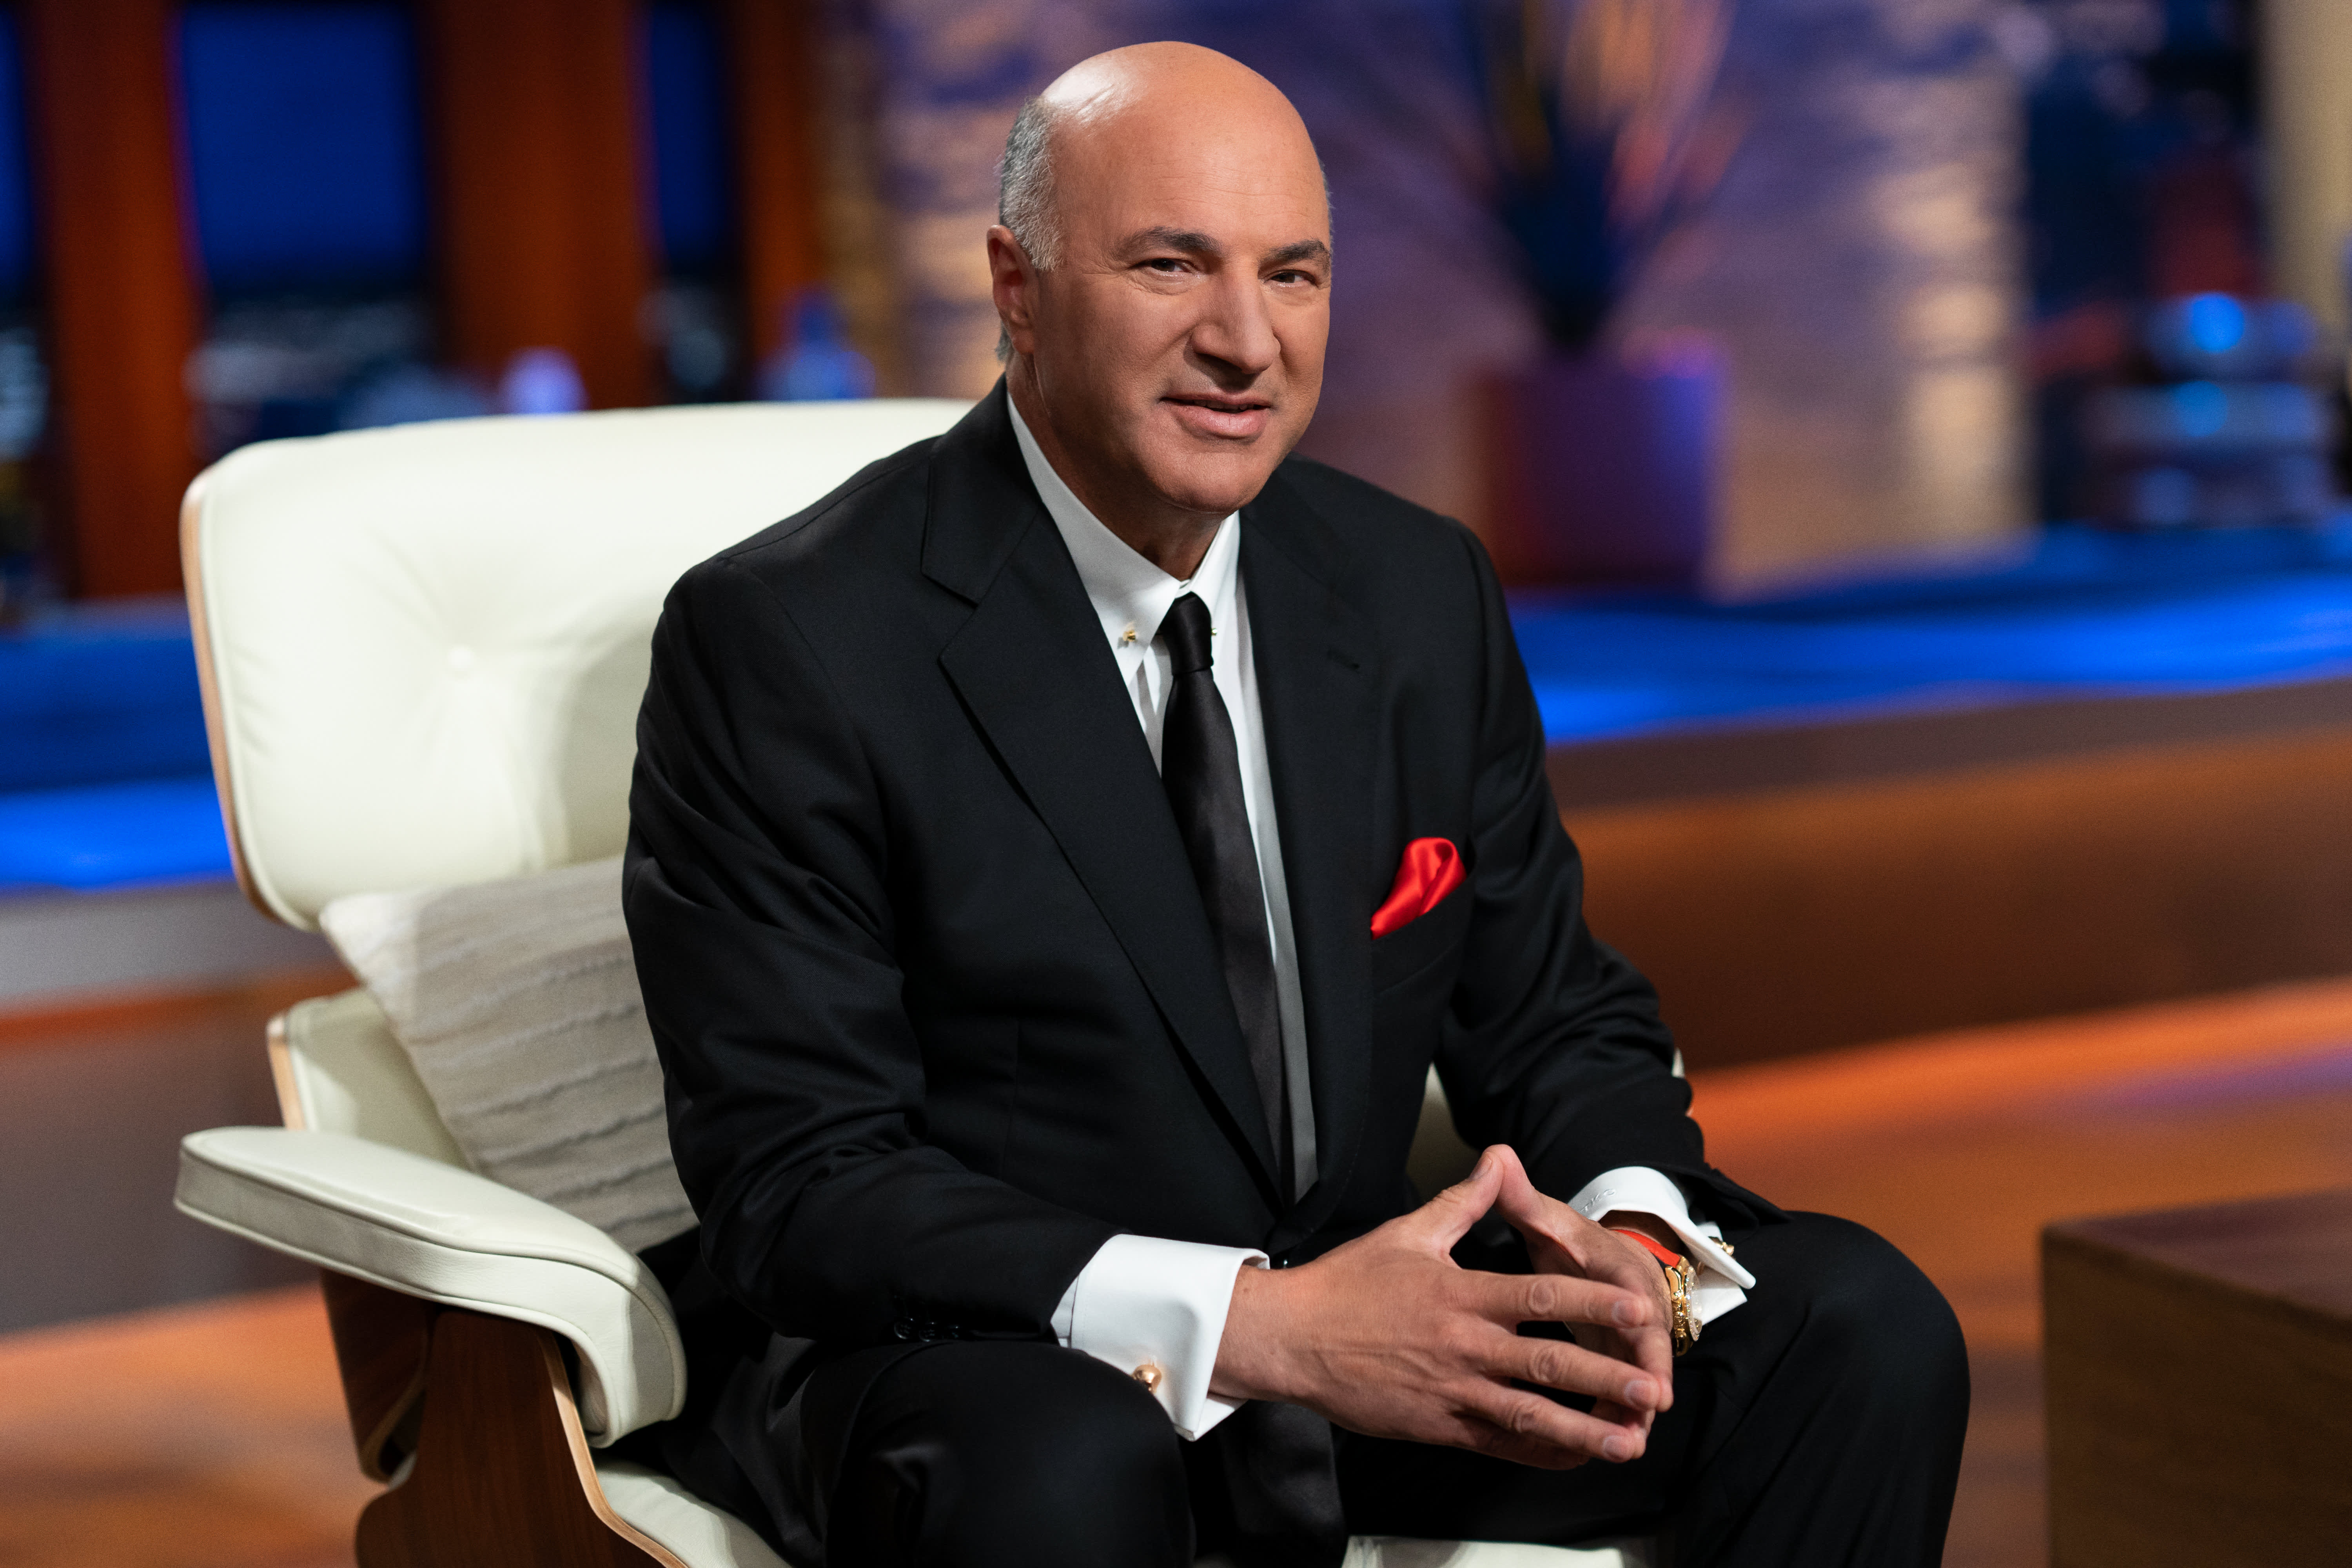 Kevin O’Leary explains why he thinks NFTs will become bigger than bitcoin